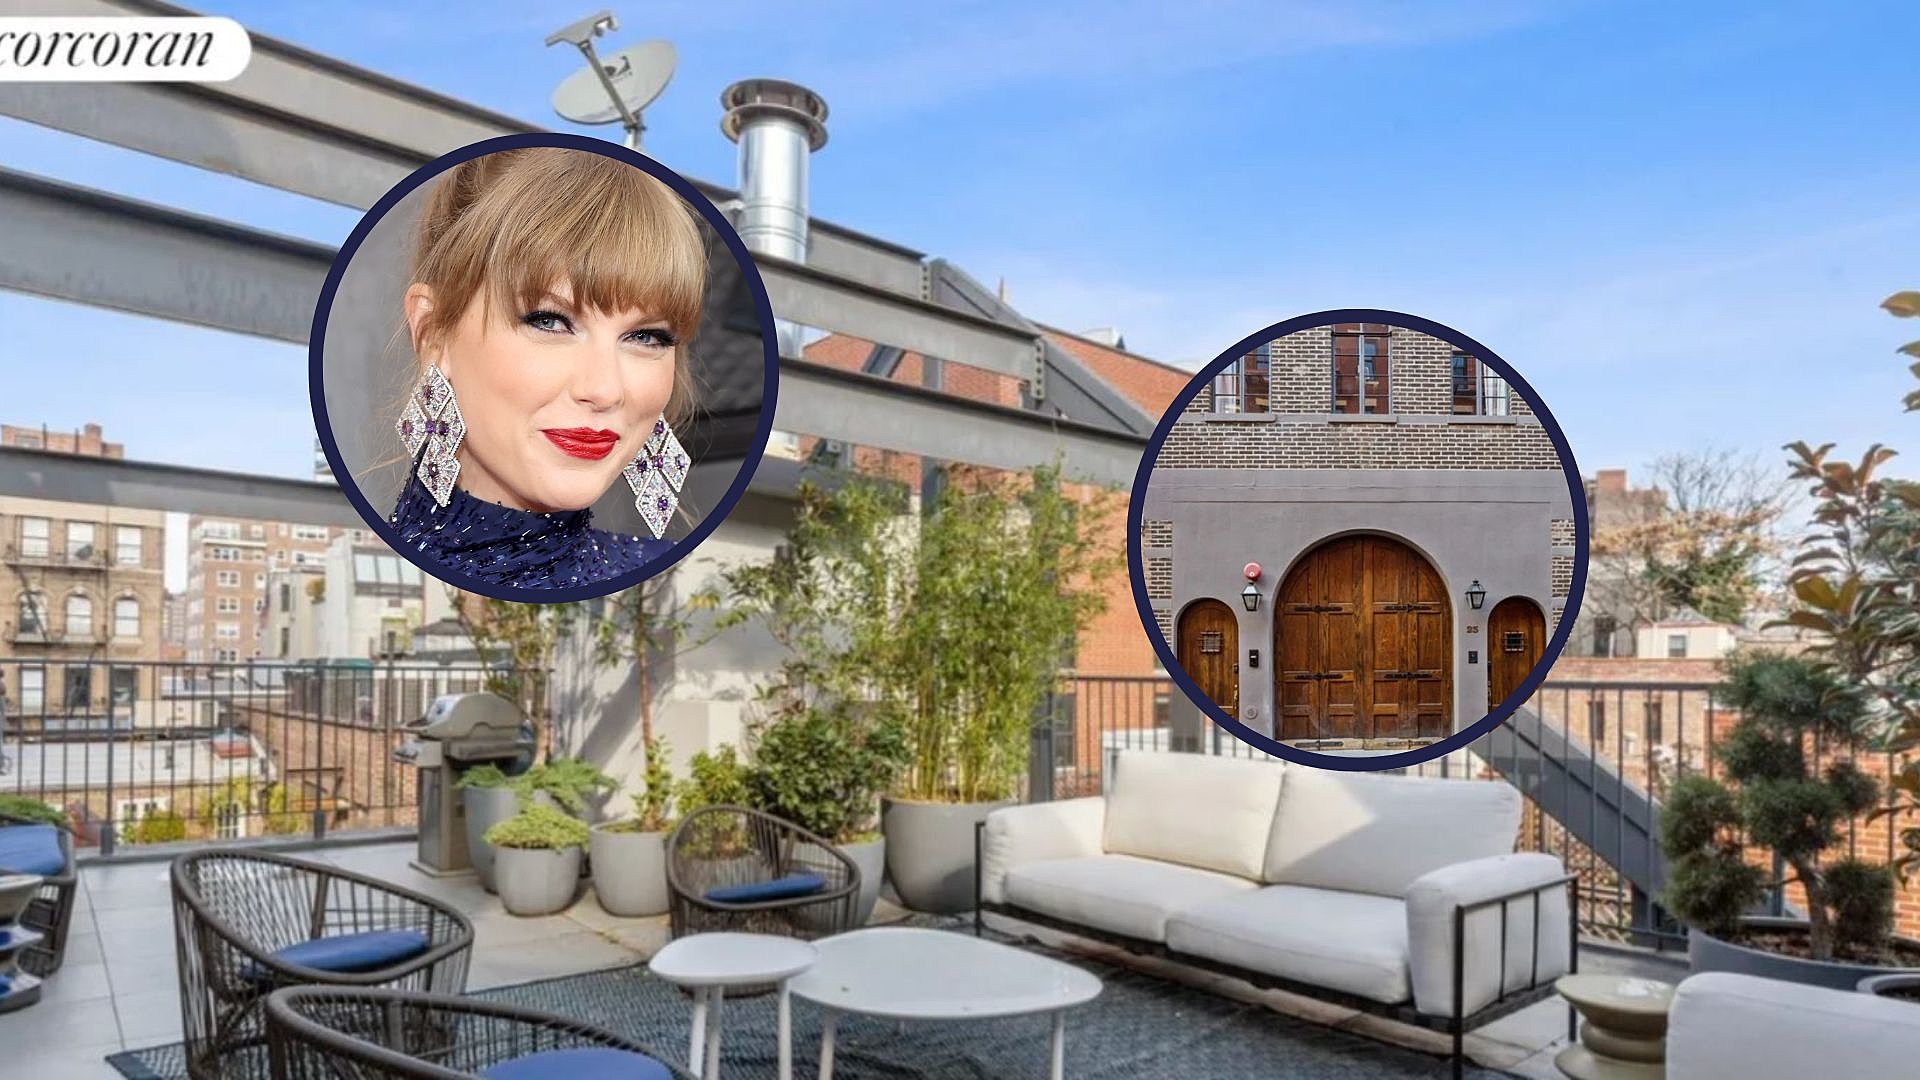 You Can Now Rent Taylor Swift's Old NYC Home That Inspired A Song